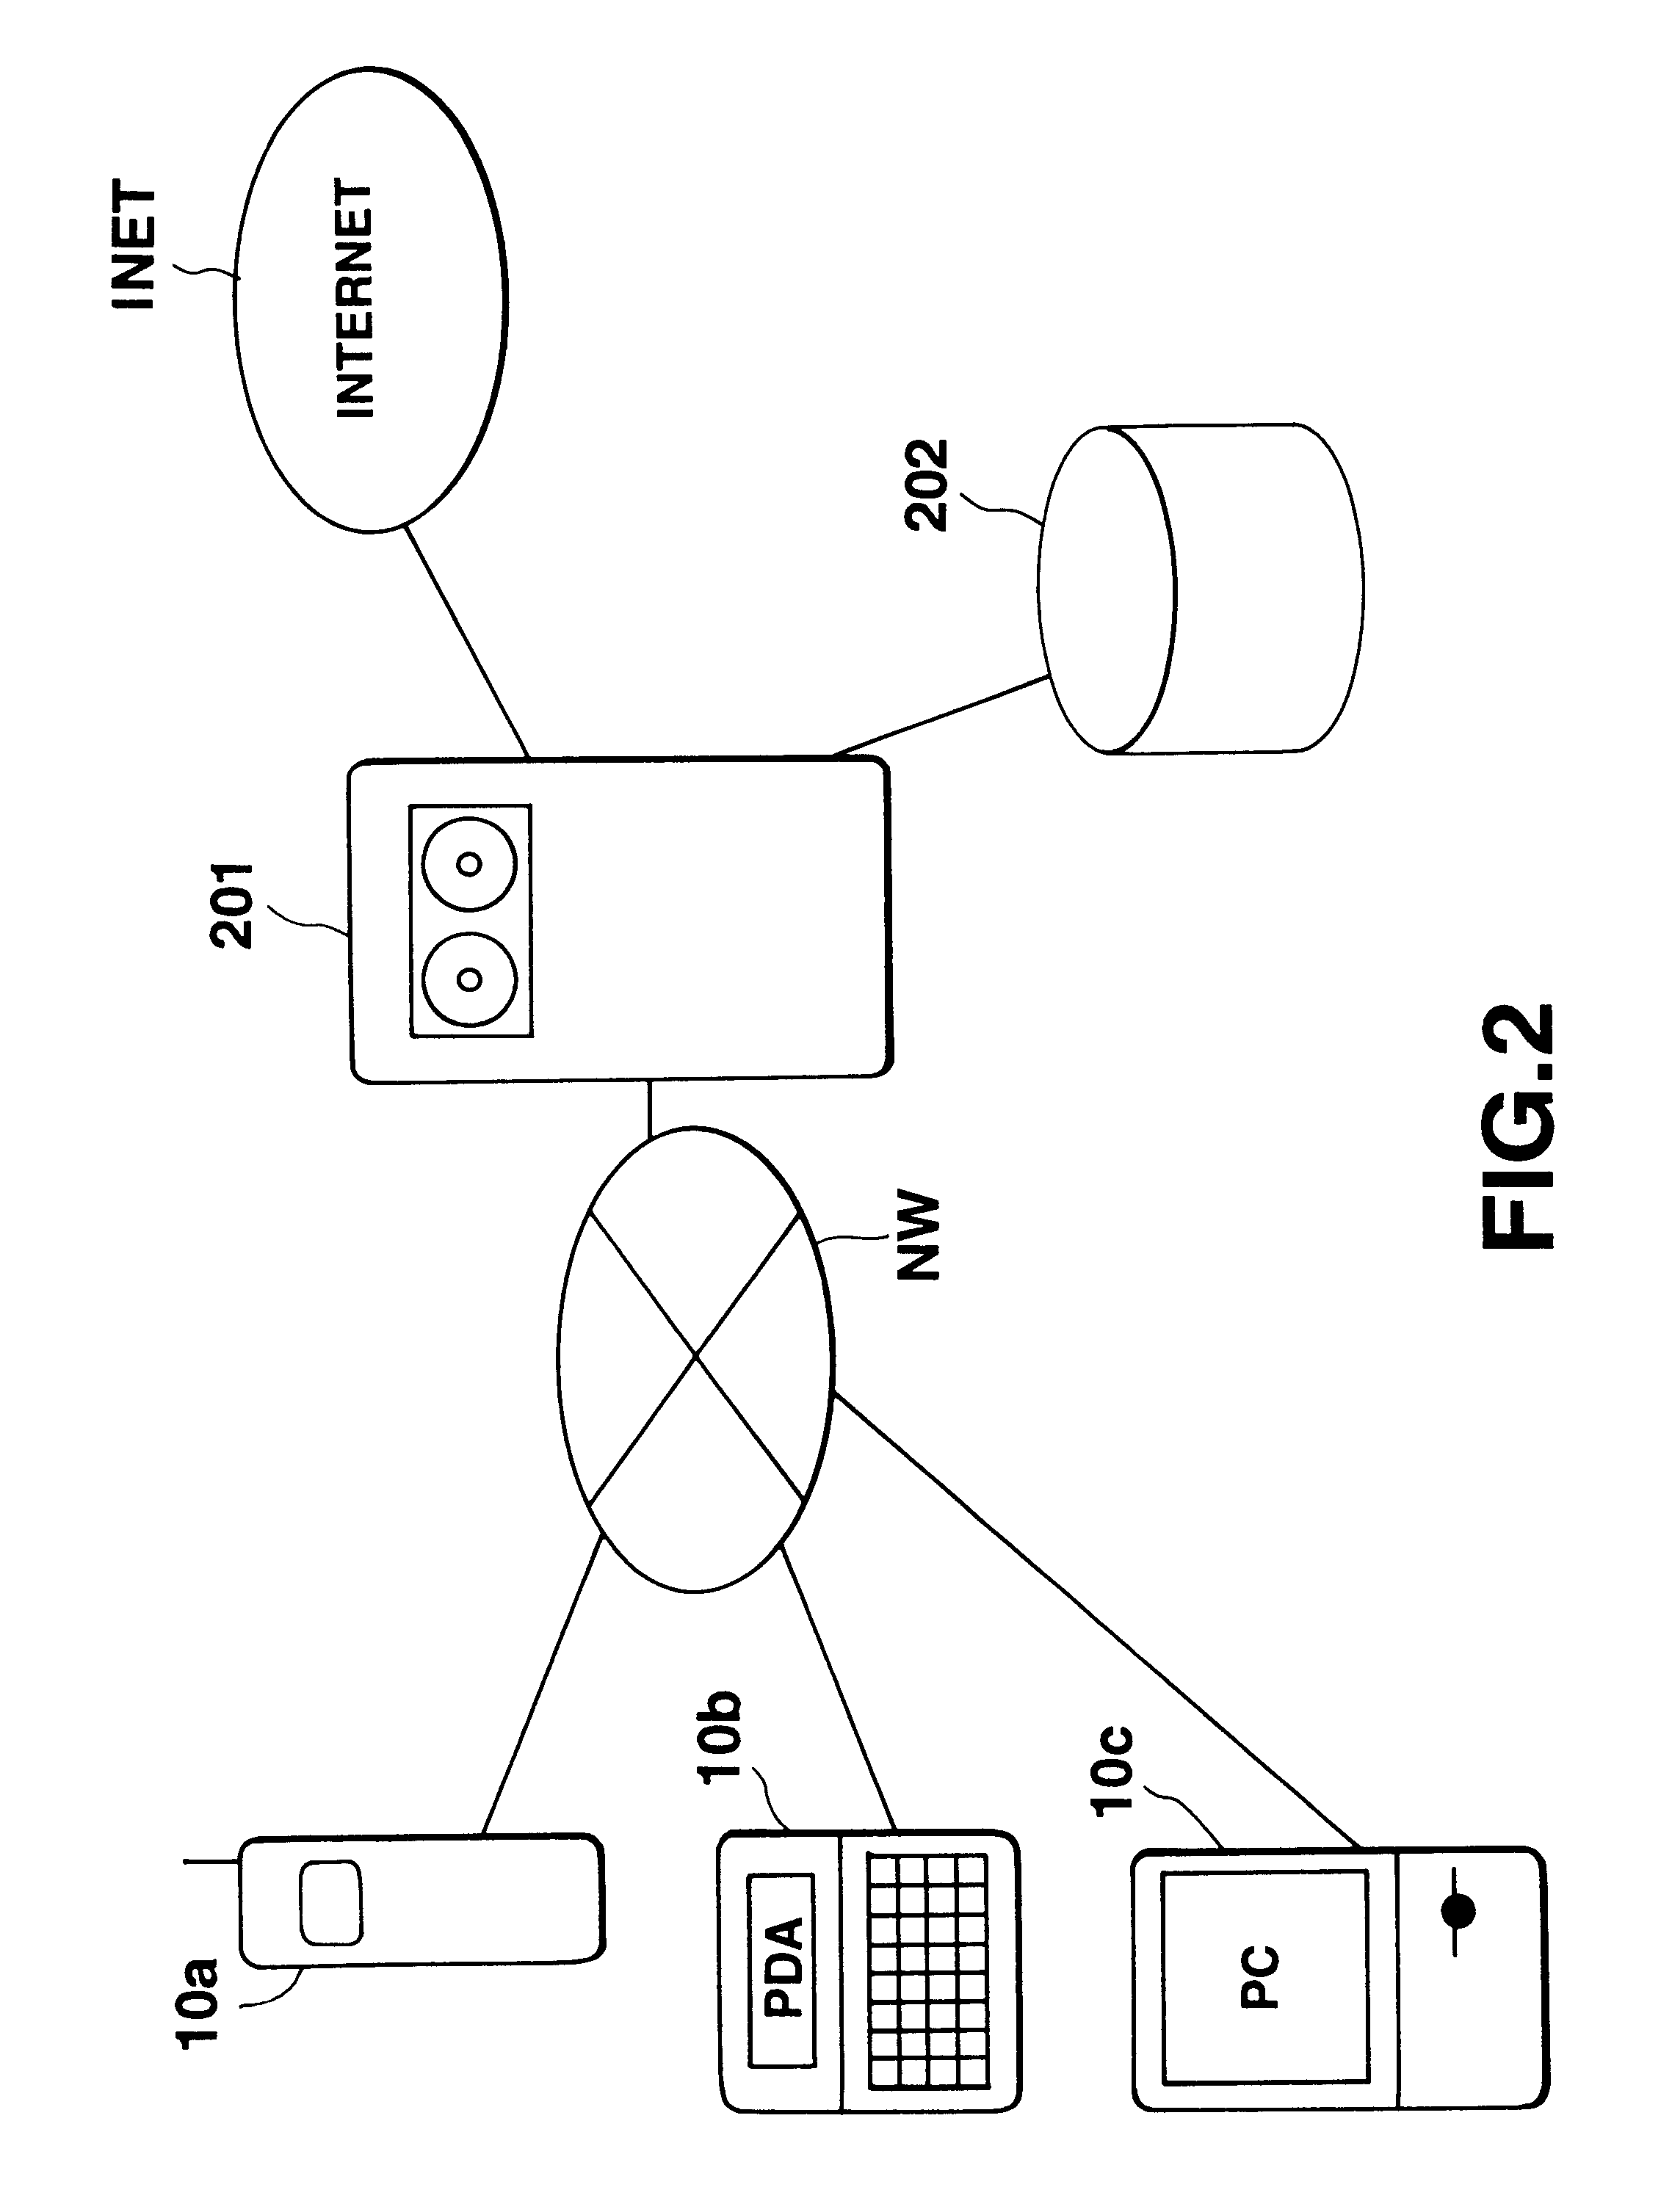 System for transferring information between a server and a data terminal through a network